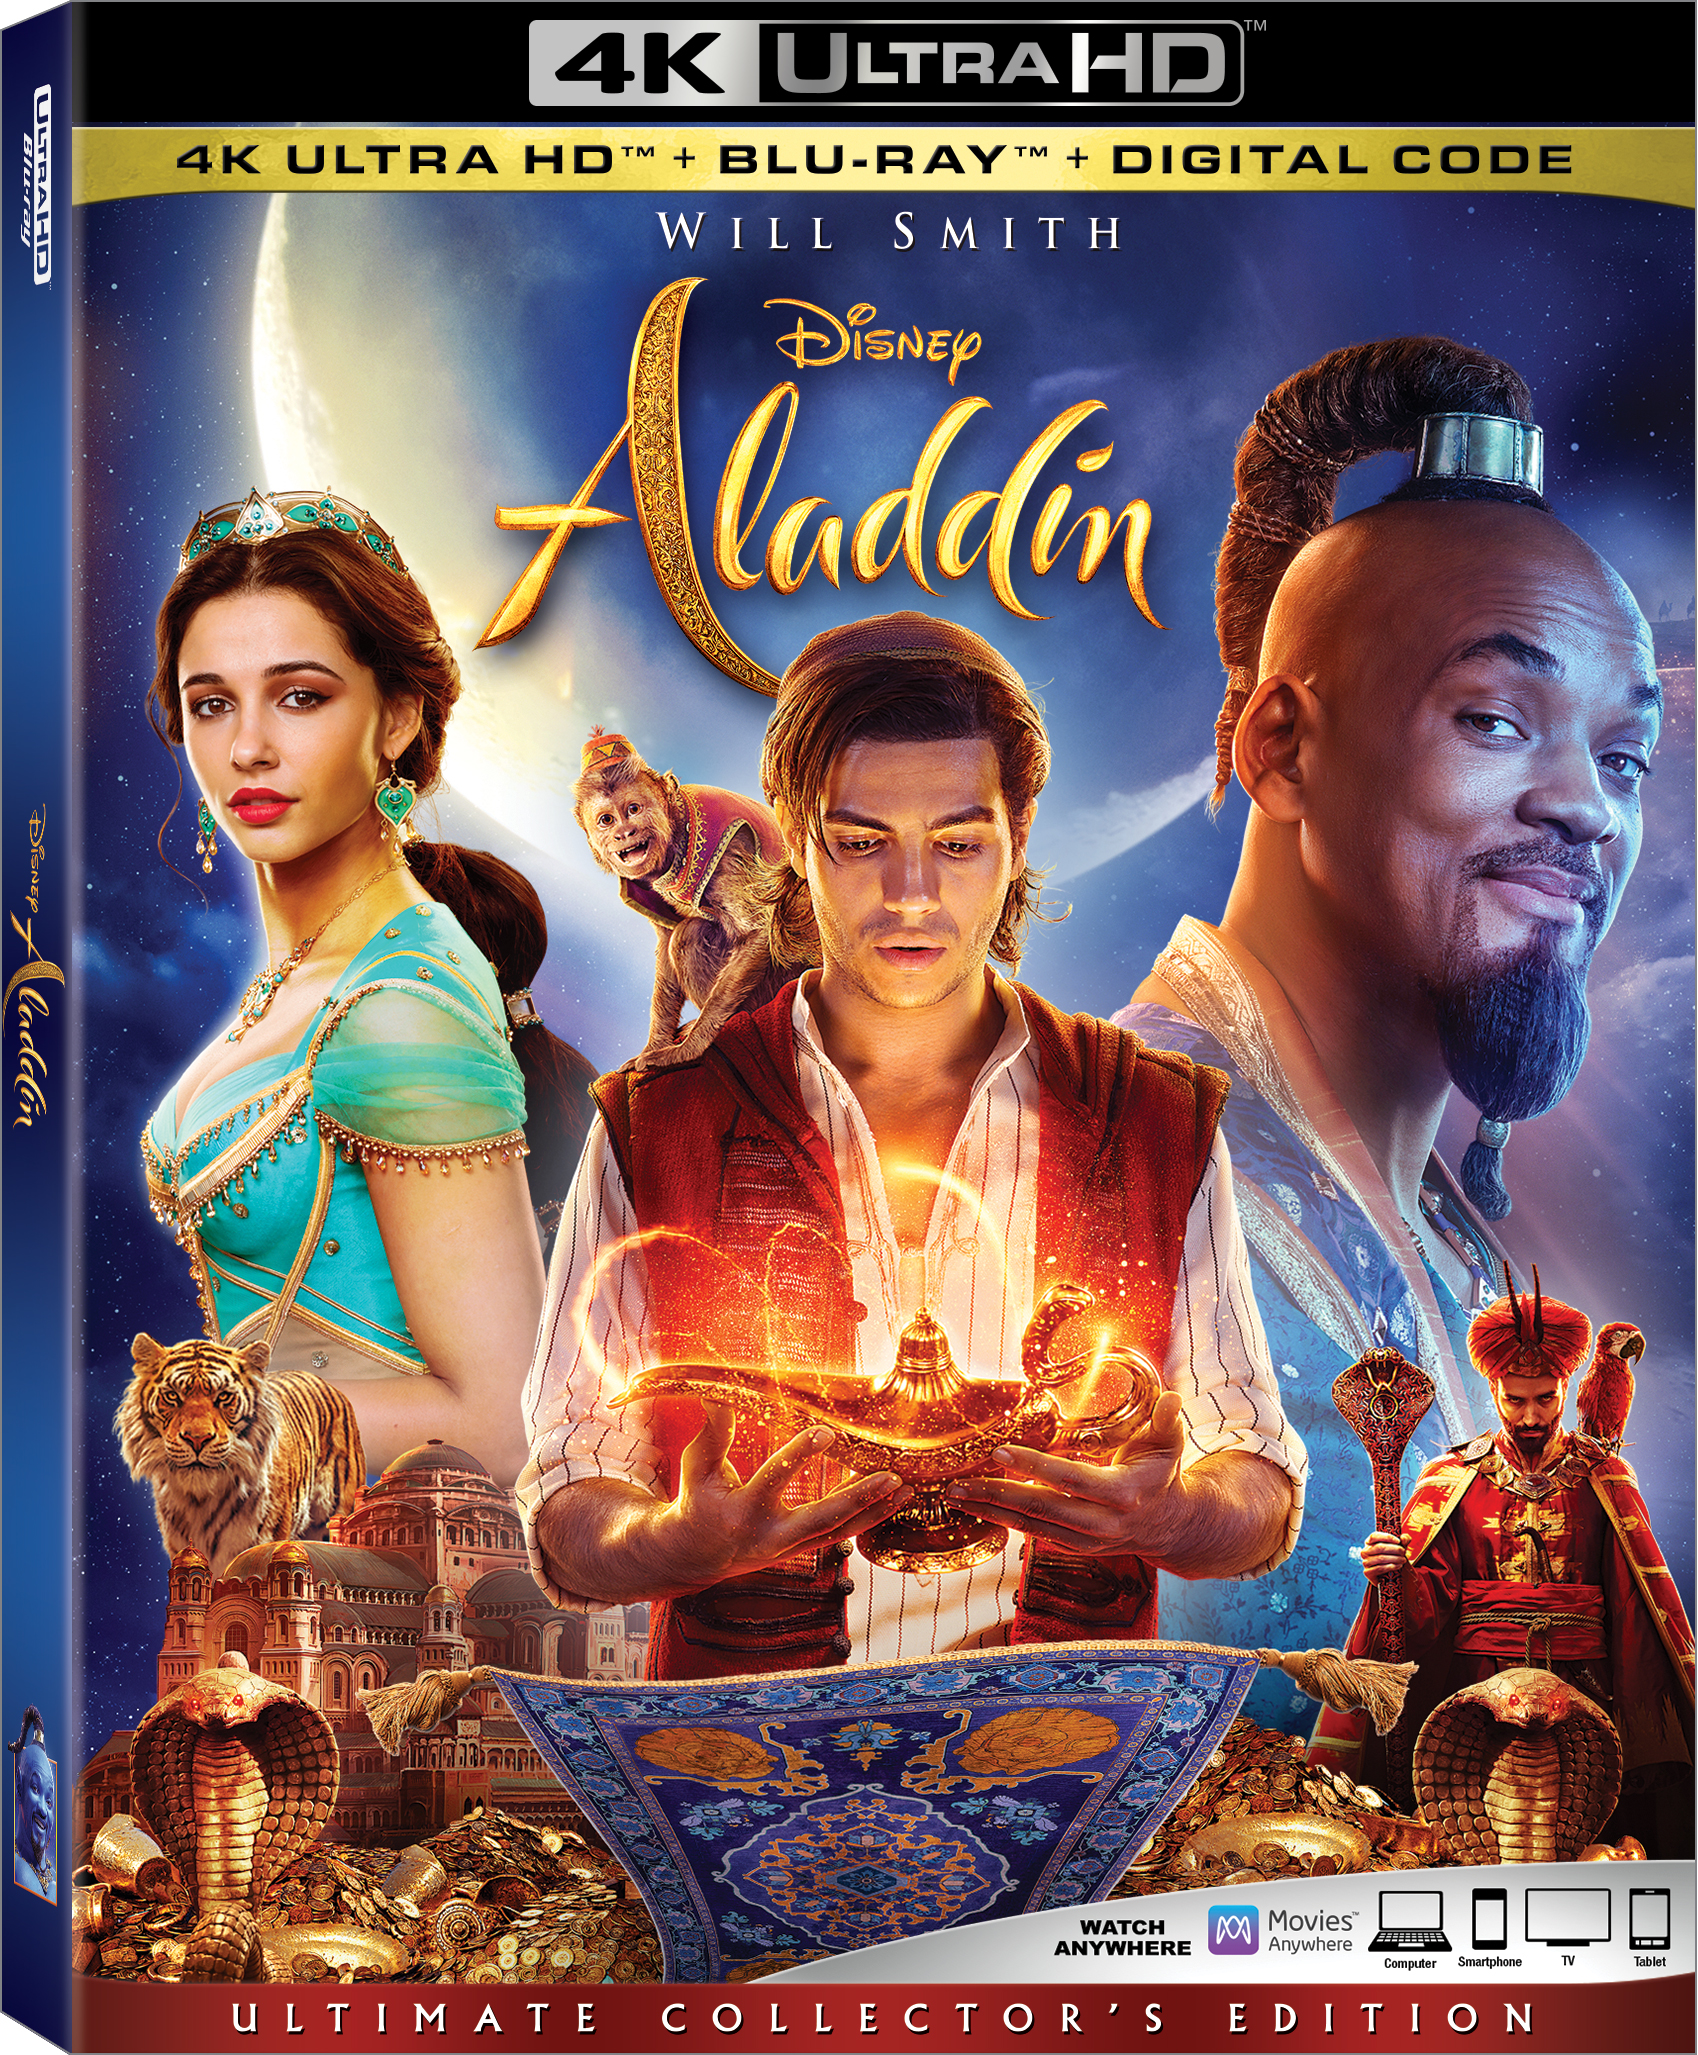 Disney’s Aladdin (Live-Action) And Aladdin Signature Collection On Digital 8/27 And Blu-ray 9/10